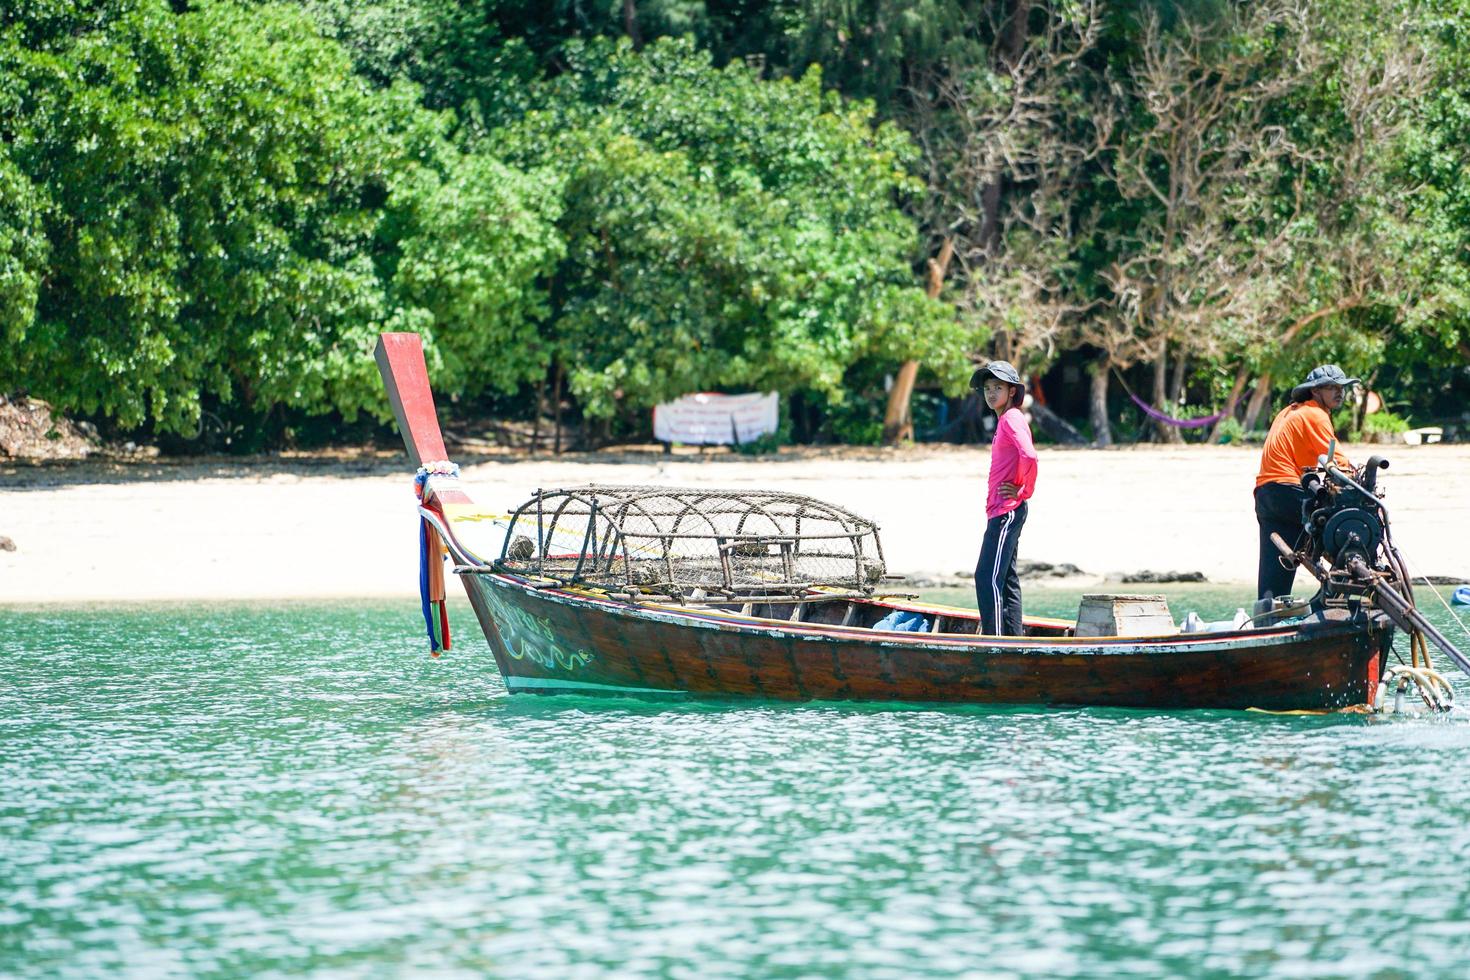 Ko Lanta, Krabi, Thailand 2019 - Fishermen drive the traditional long-tail boat and find fish by tools in sunny day with defocused island in background photo